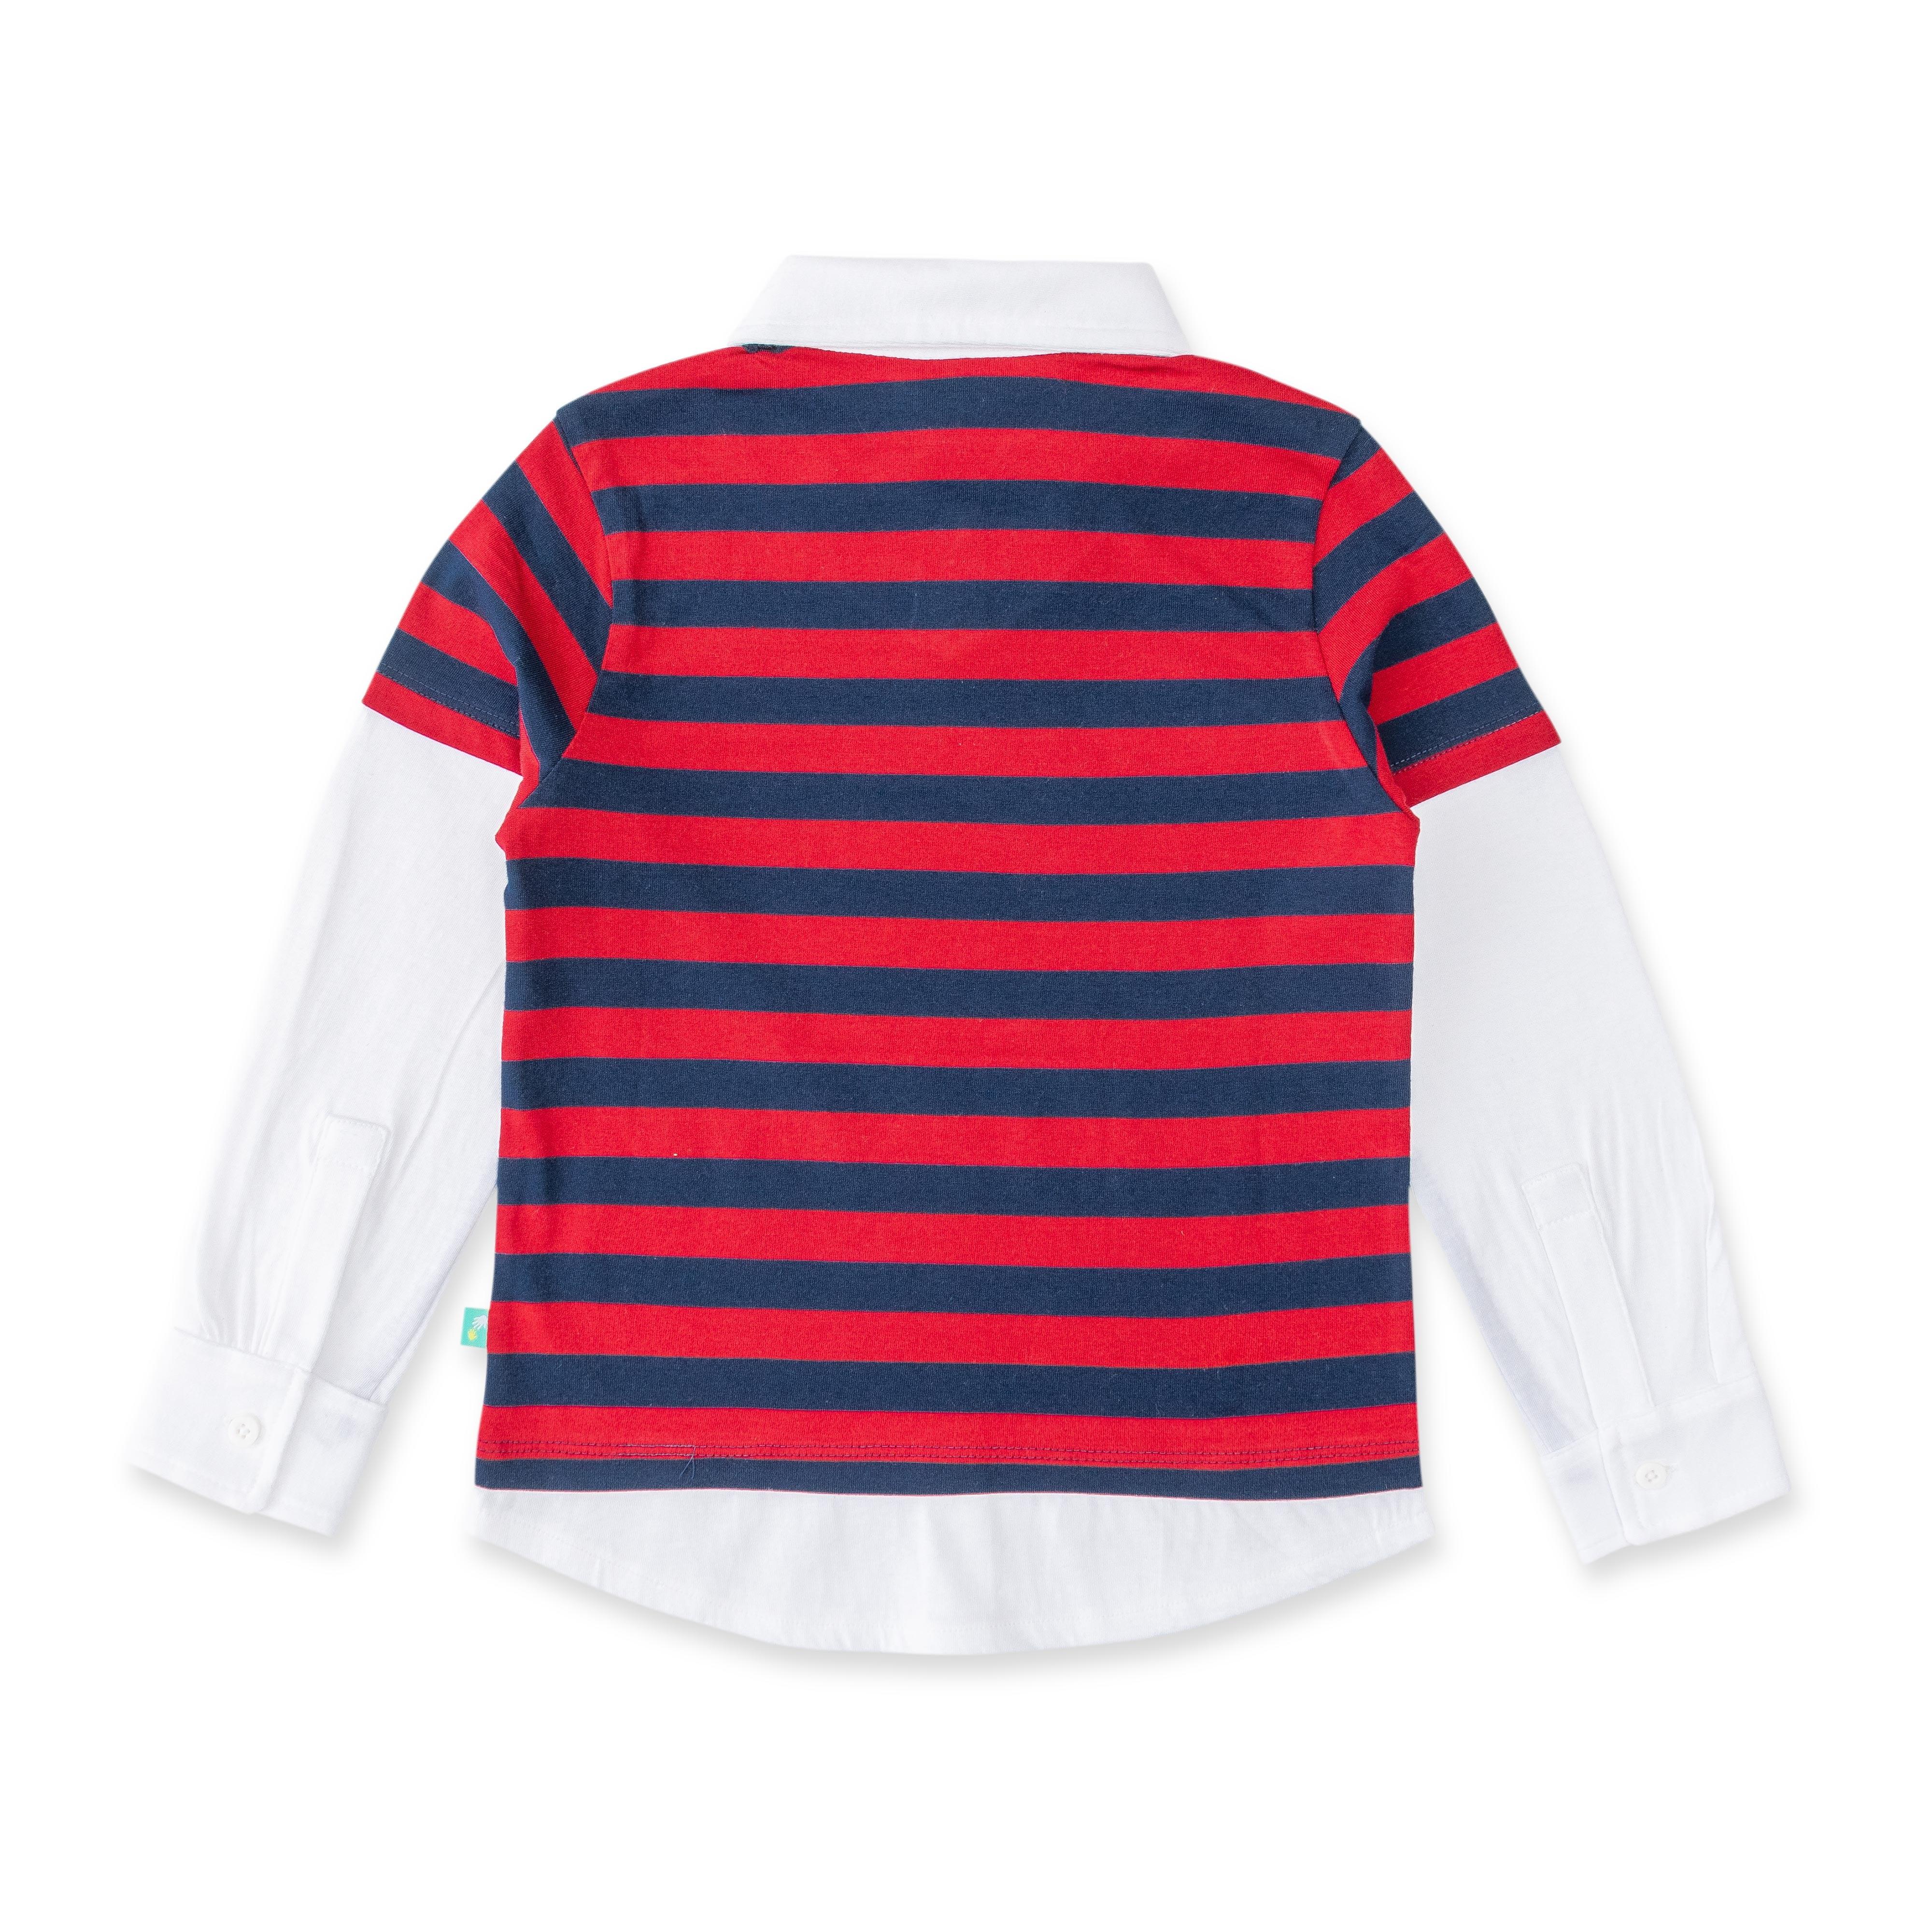 Baby Boys Striped Full Sleeve Polo T Shirt - Juscubs